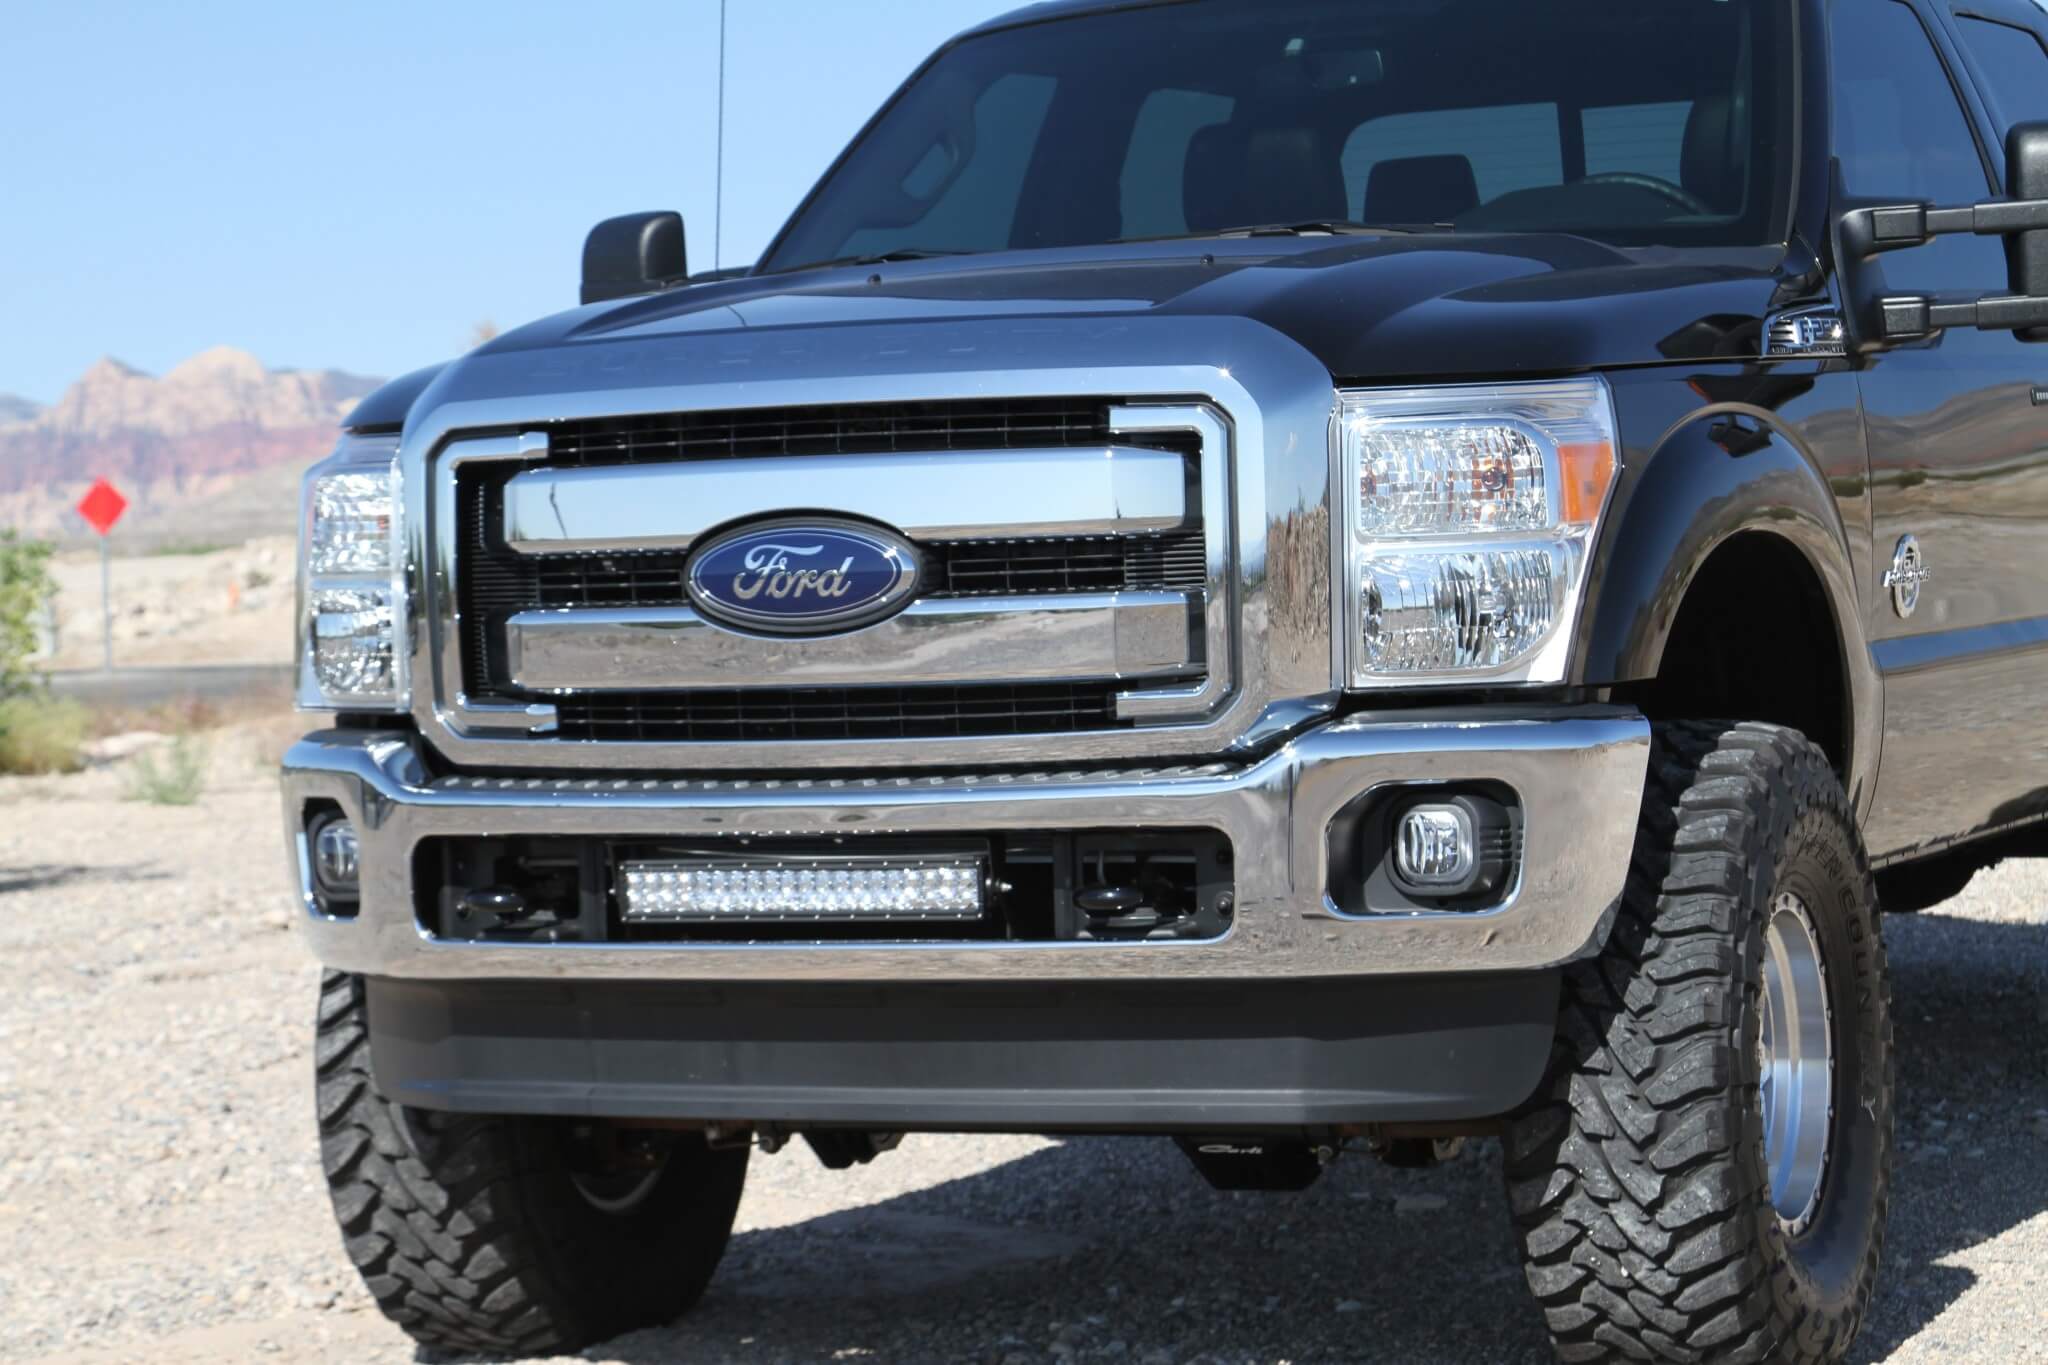 A Rigid 20-inch LED light bar was installed inside the bumper for better night vision. 